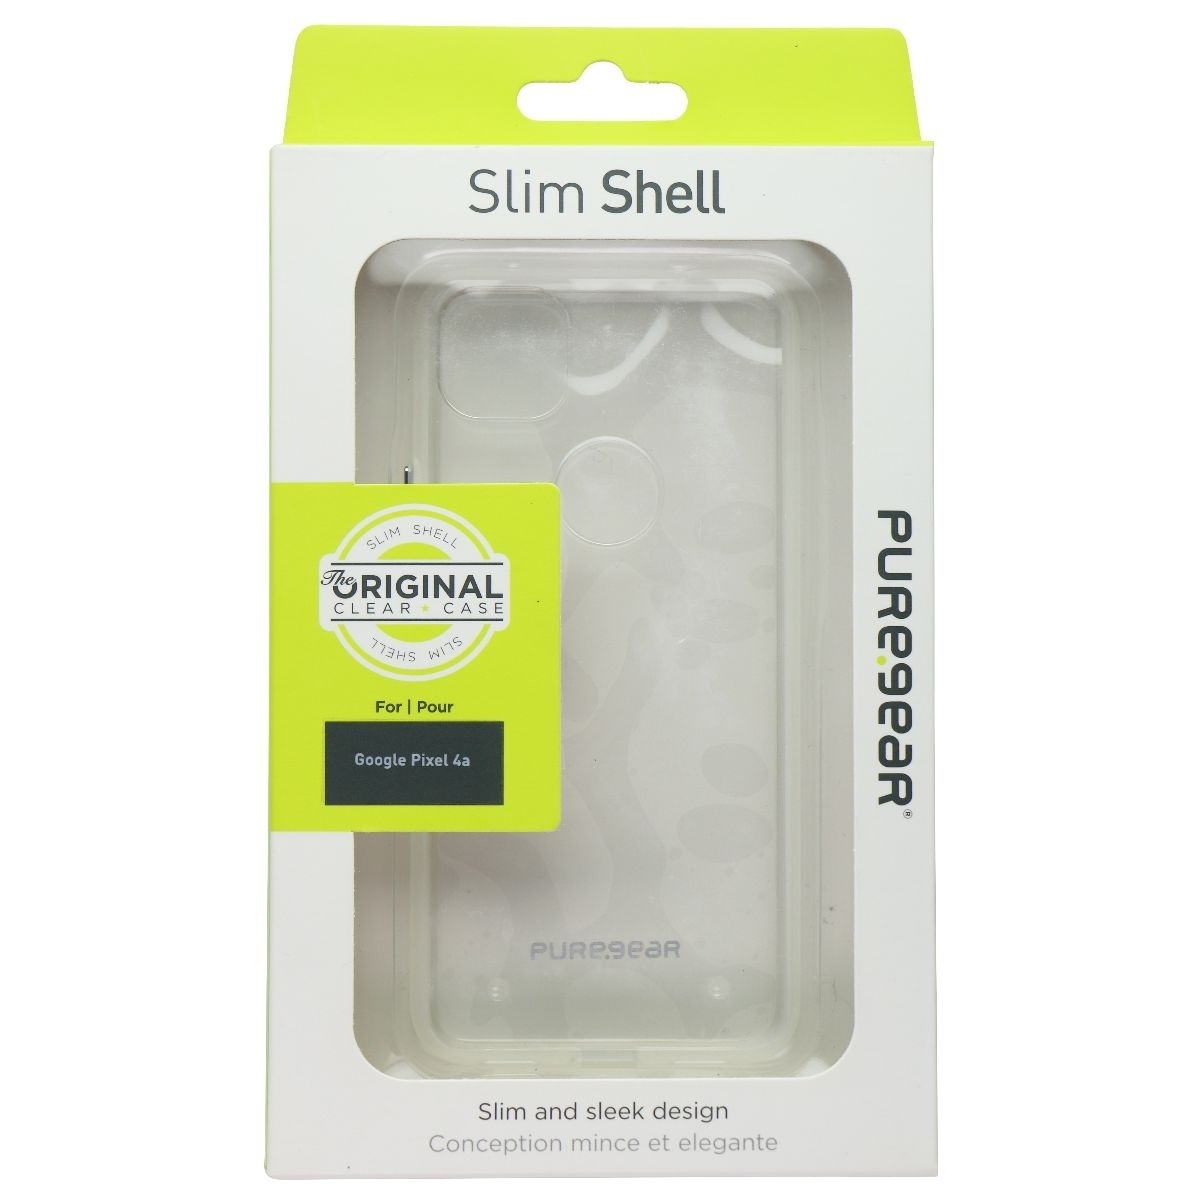 PureGear Slim Shell Hard Case For Google Pixel 4a (Non-5G, 2020) - Clear (Refurbished)